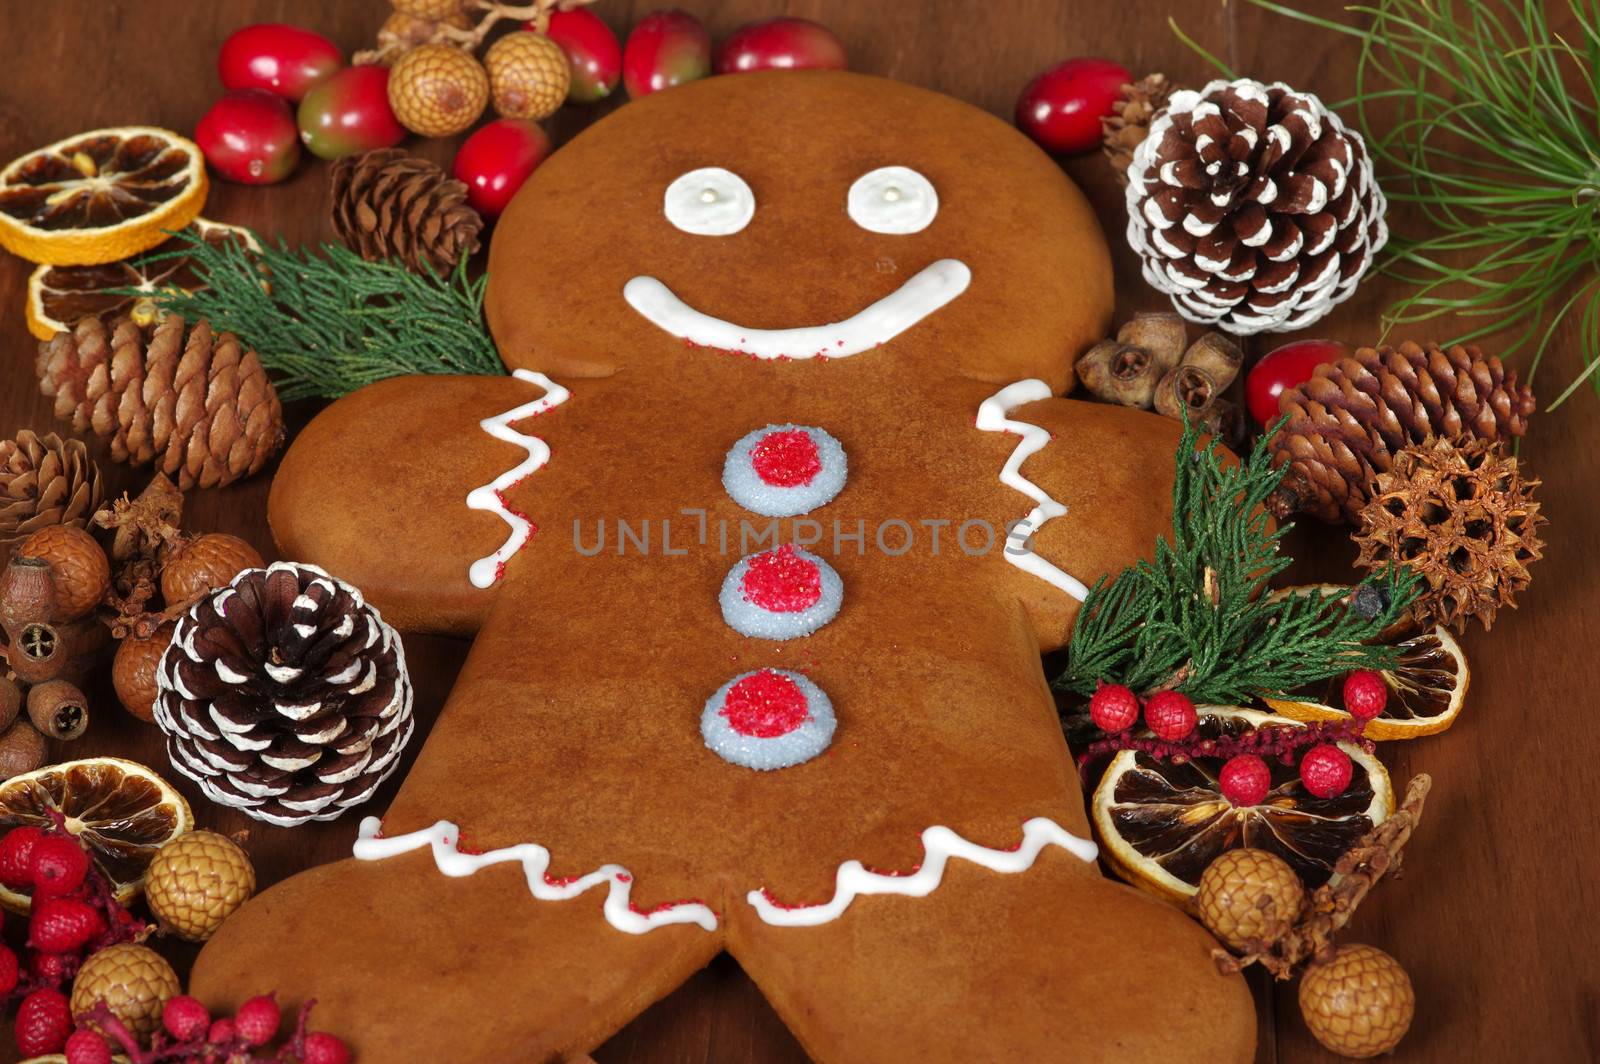 Gingerbread Man by BVDC